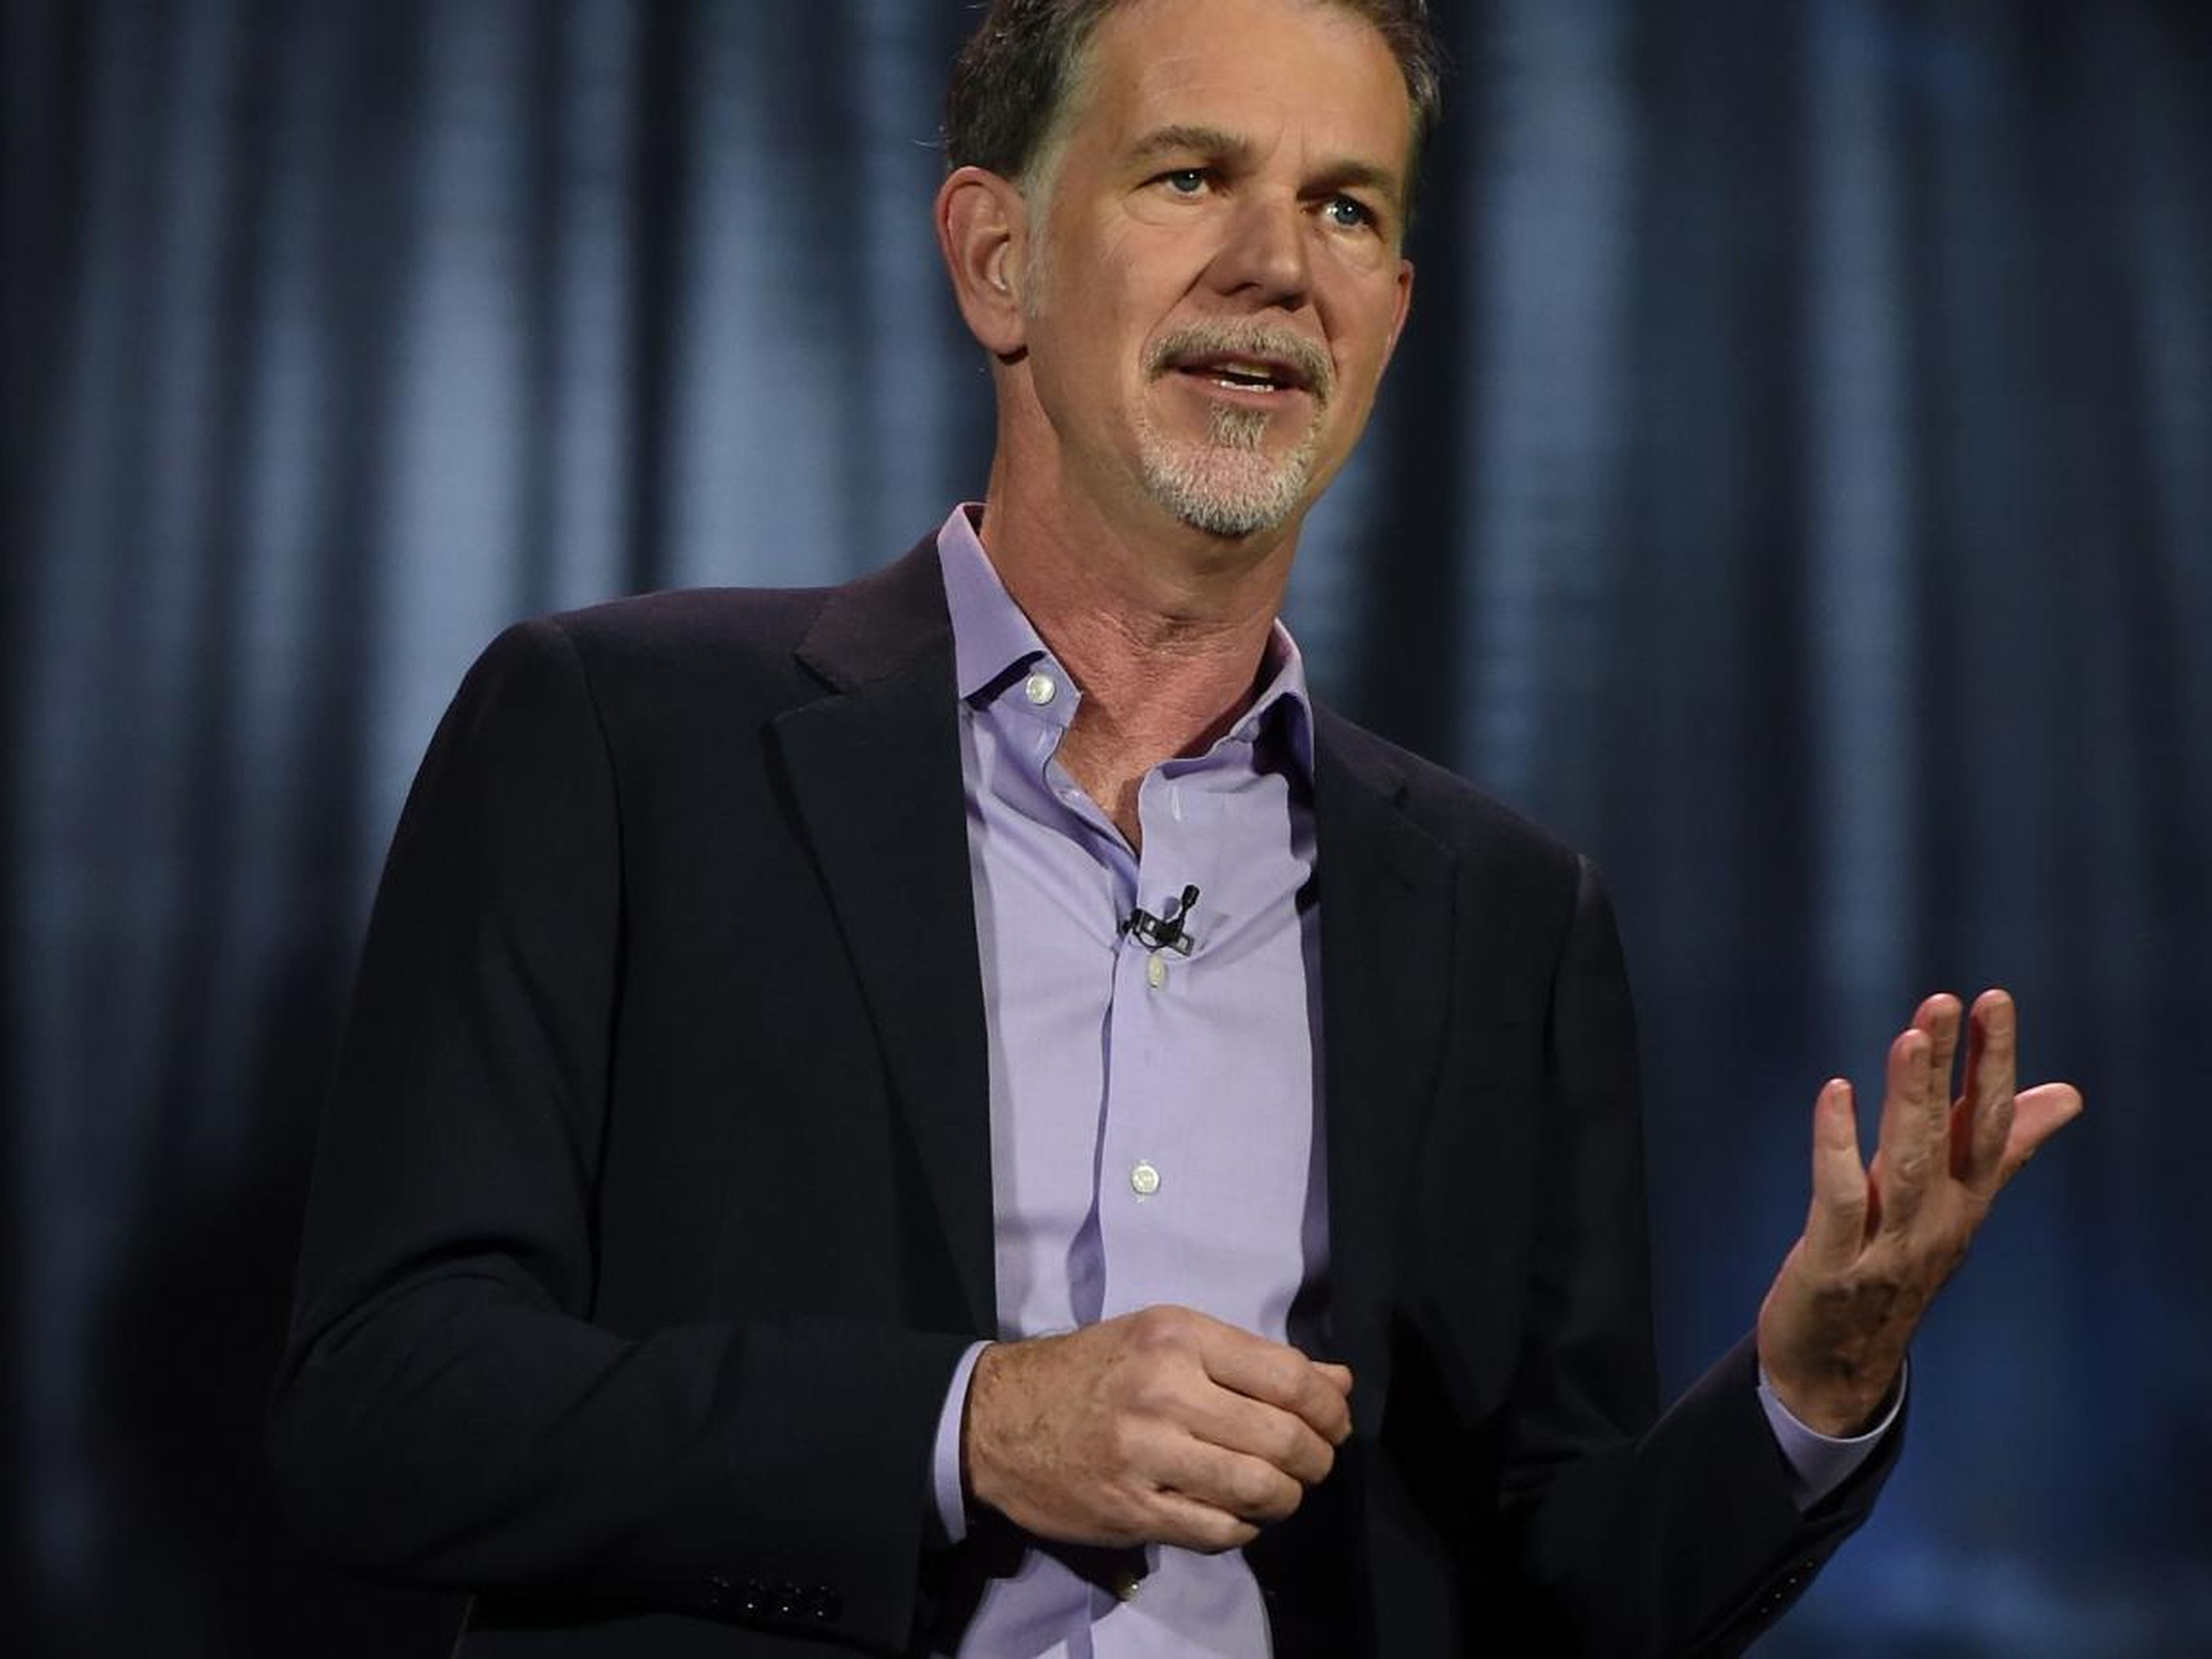 Netflix CEO Reed Hastings tells employees about a colleague who was sexually harassed to show why some victims don't come forward